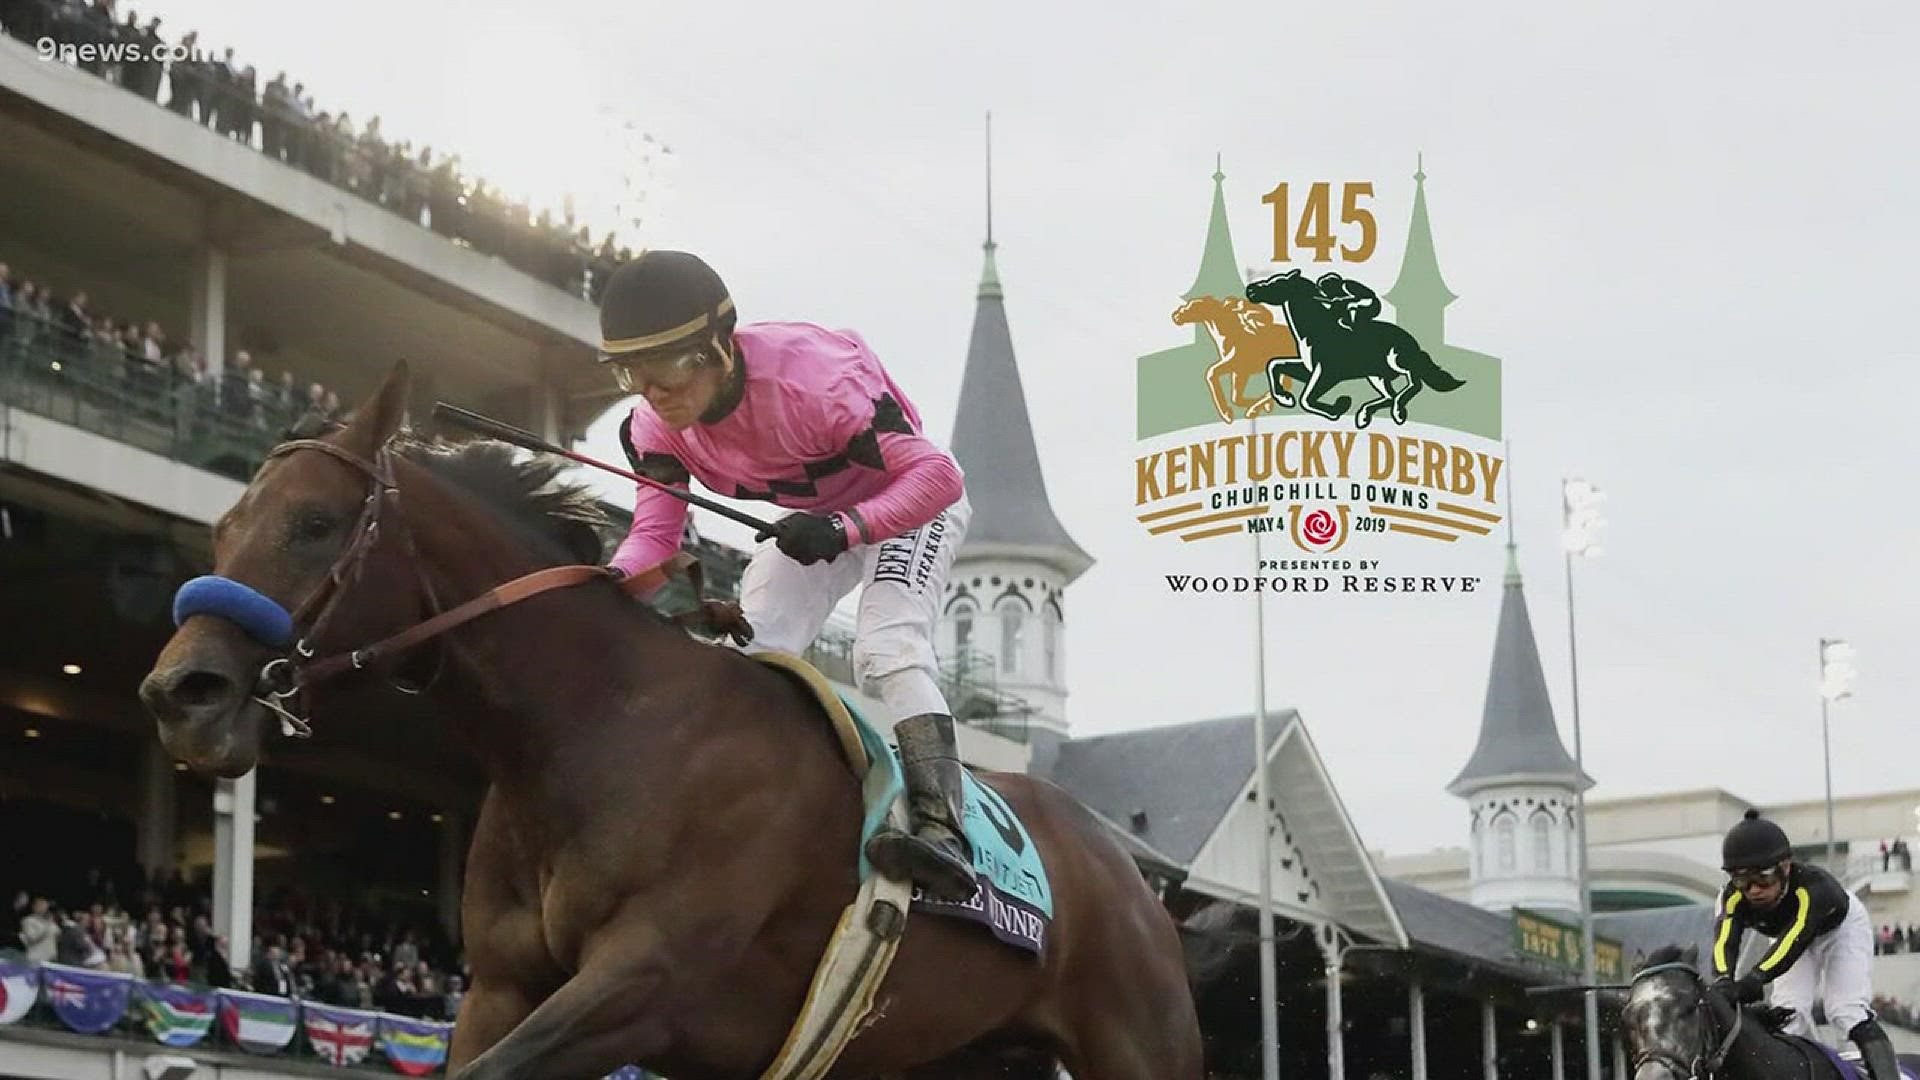 Daniel Sechtin, with 9NEWS' sister station in Louisville, gives us all the details from Churchill Downs on Kentucky Derby 2019 weekend.